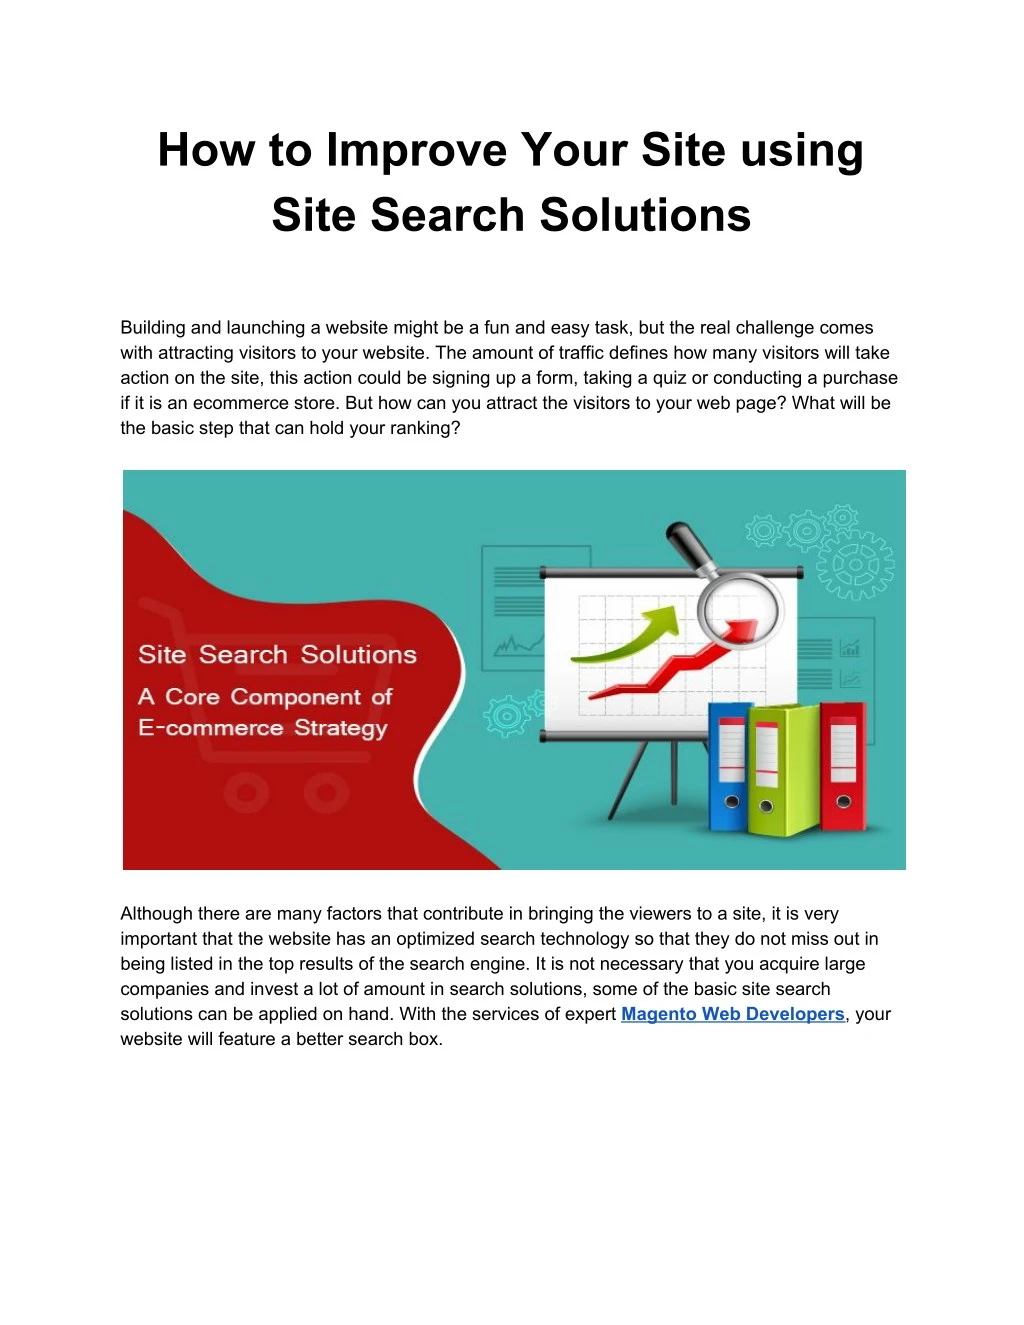 how to improve your site using site search